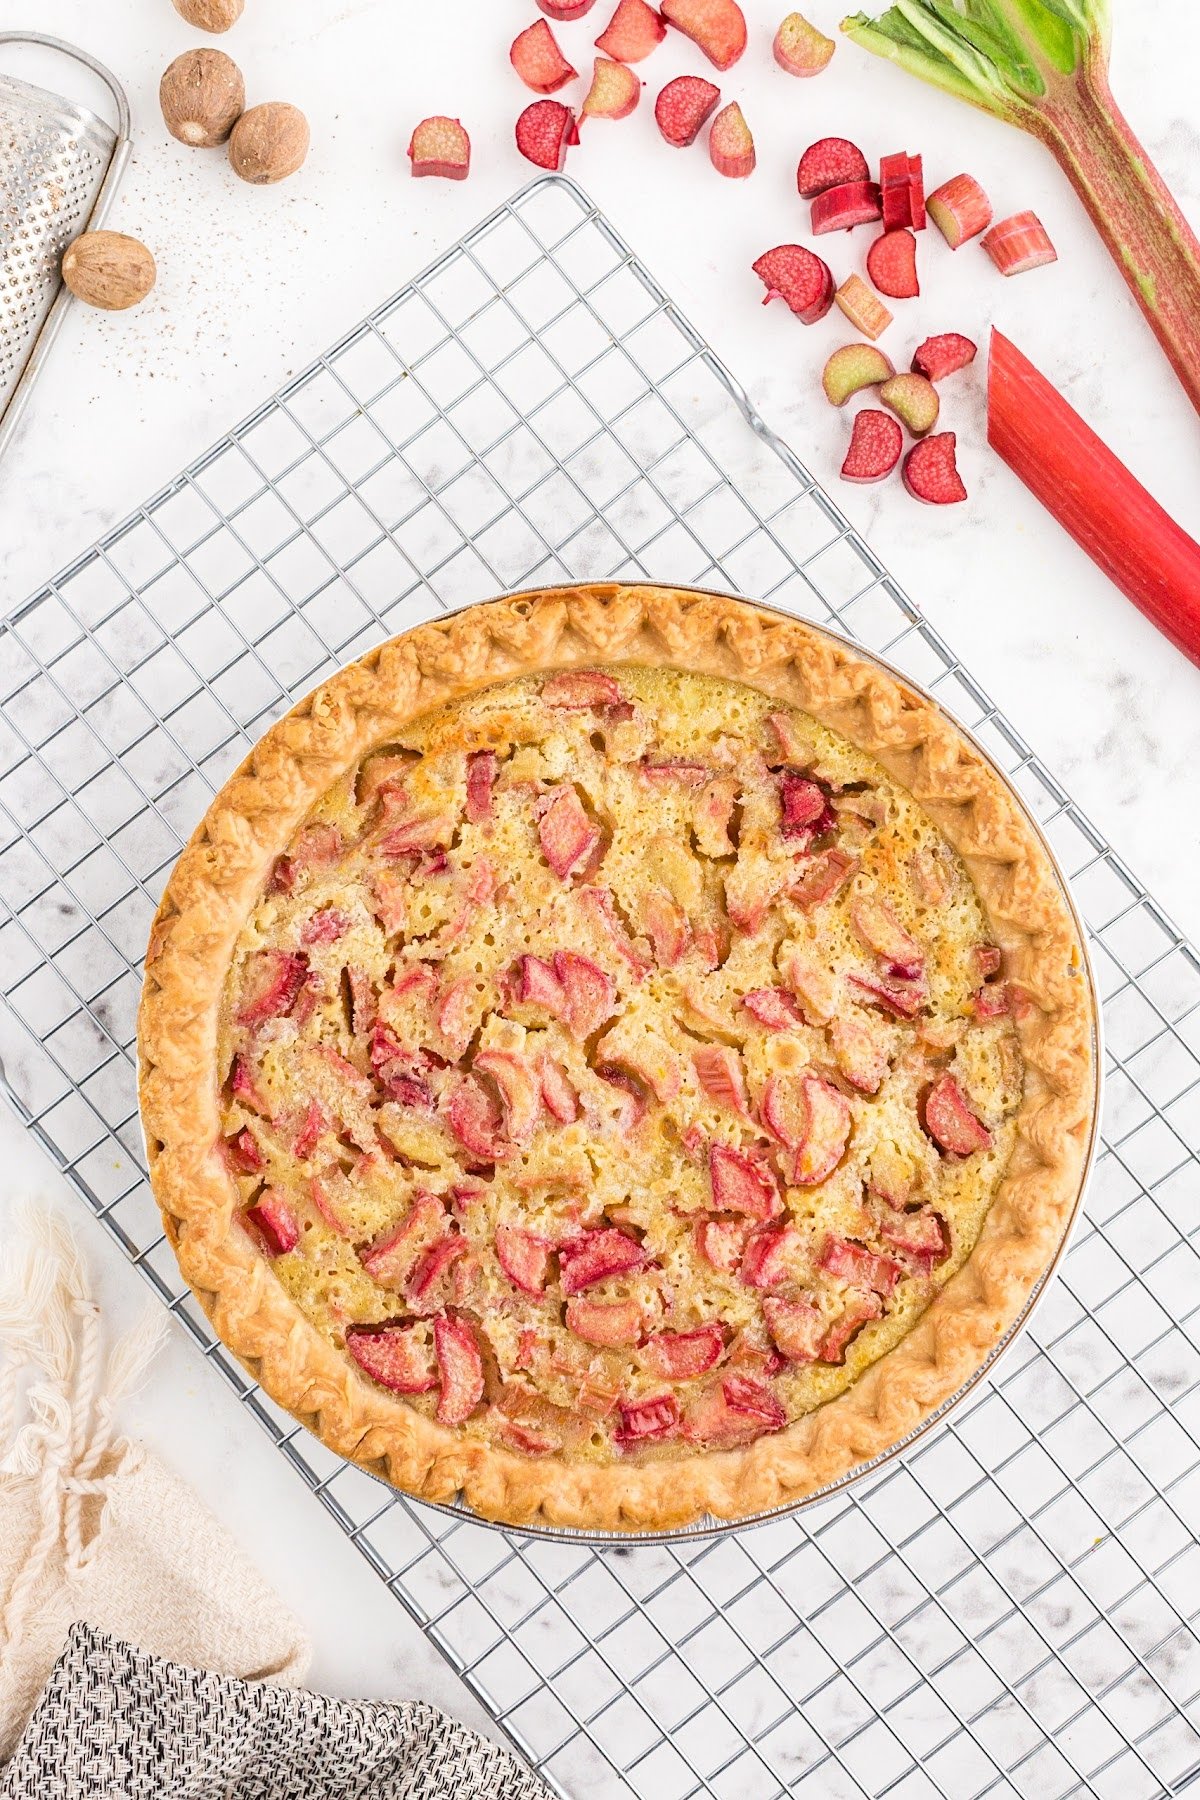 Baked rhubarb custard pie on metal cooling rack, linen, nutmeg, and rhubarb pieces scattered on counter.